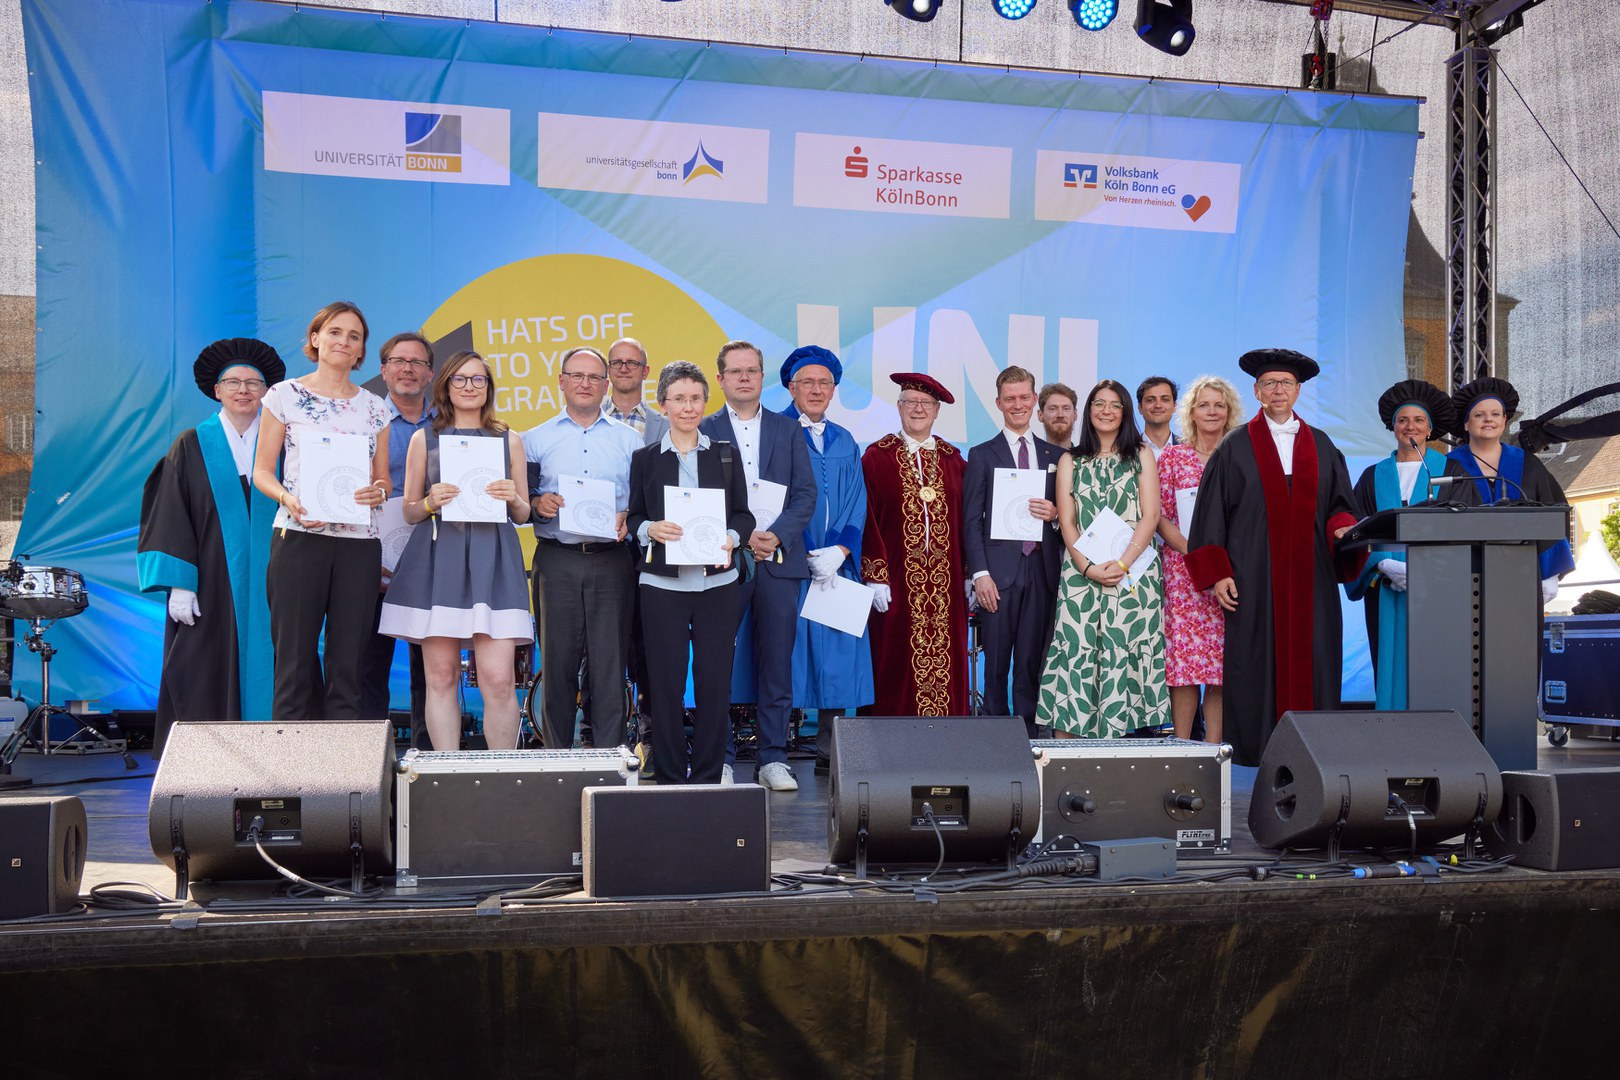 Lehrpreise 2023 - 13 of the 14 award-winning teachers received their certificates in person at the university festival. Also in the picture: Dean and award-winner Prof. Walter Witke (light blue gown), Rector Prof. Michael Hoch (red gown), Vice Rector Prof. Irmgard Förster (left, black-blue gown), Vice Rector Prof. Annette Scheersoi (right, black-light blue gown) , Vice Rector Prof. Birgit Ulrike Münch (right, black-dark blue gown) and Vice Rector Prof. Klaus Sandmann (black-red gown).